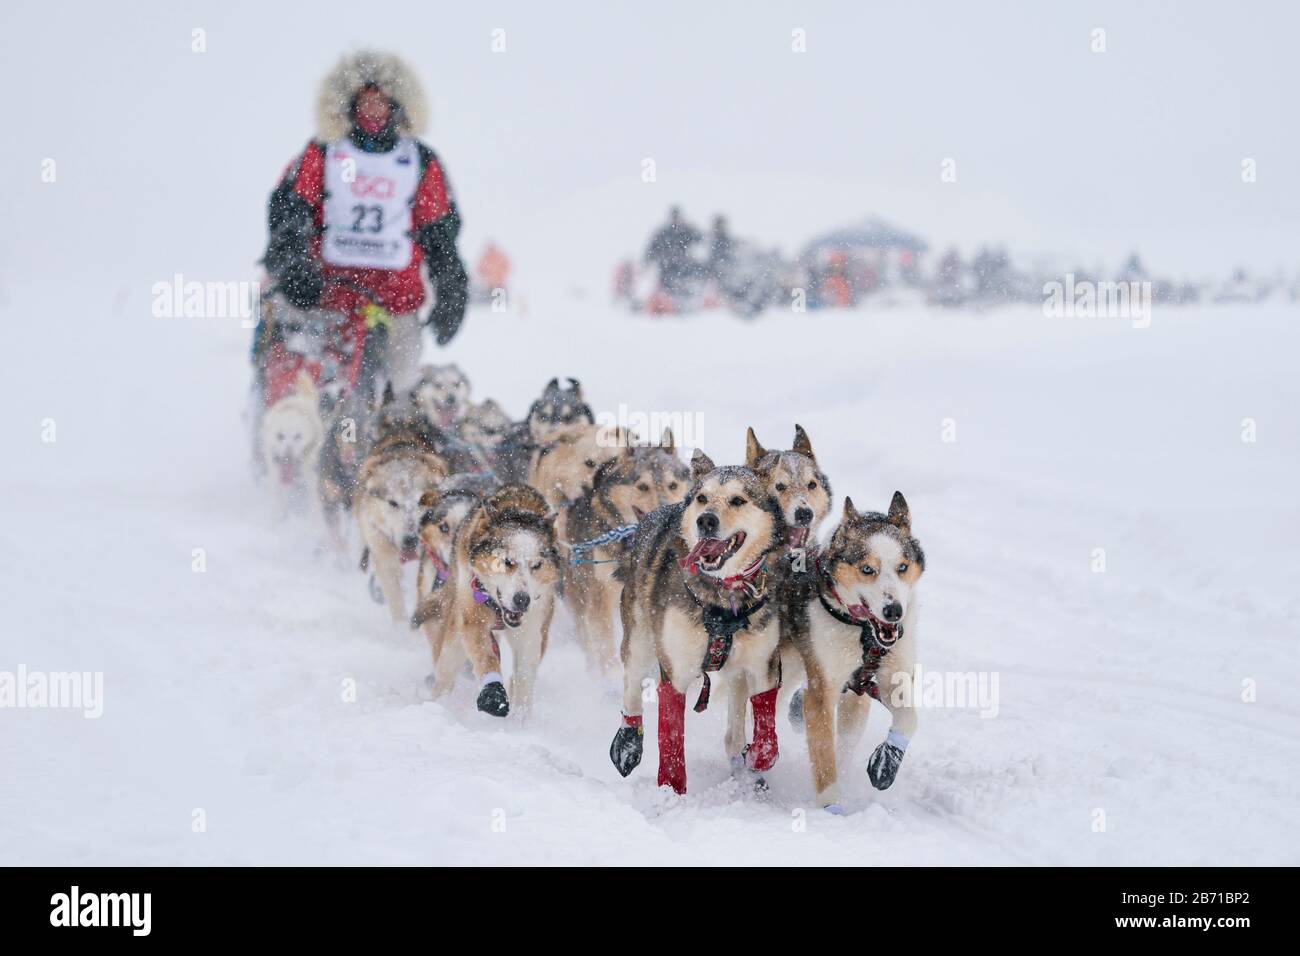 Musher Aily Zirkle competing in the 48th Iditarod Trail Sled Dog Race in Southcentral Alaska. Stock Photo